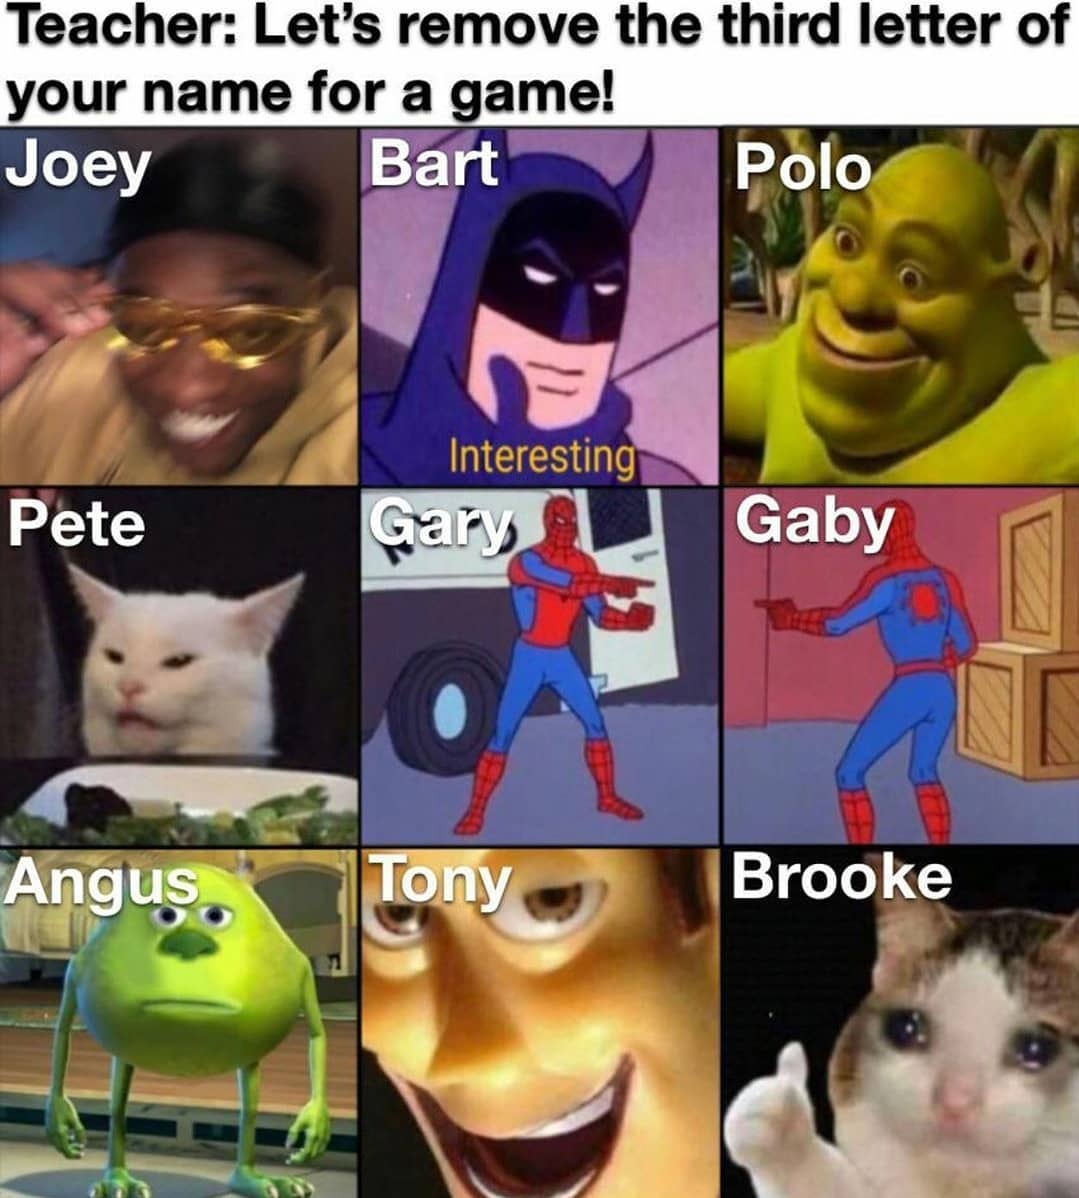 dank memes - remove the third letter of your name meme - Teacher Let's remove the third letter of your name for a game! Joey Bart Polo Pete Interesting Gary Gaby Angus. Tony Brooke